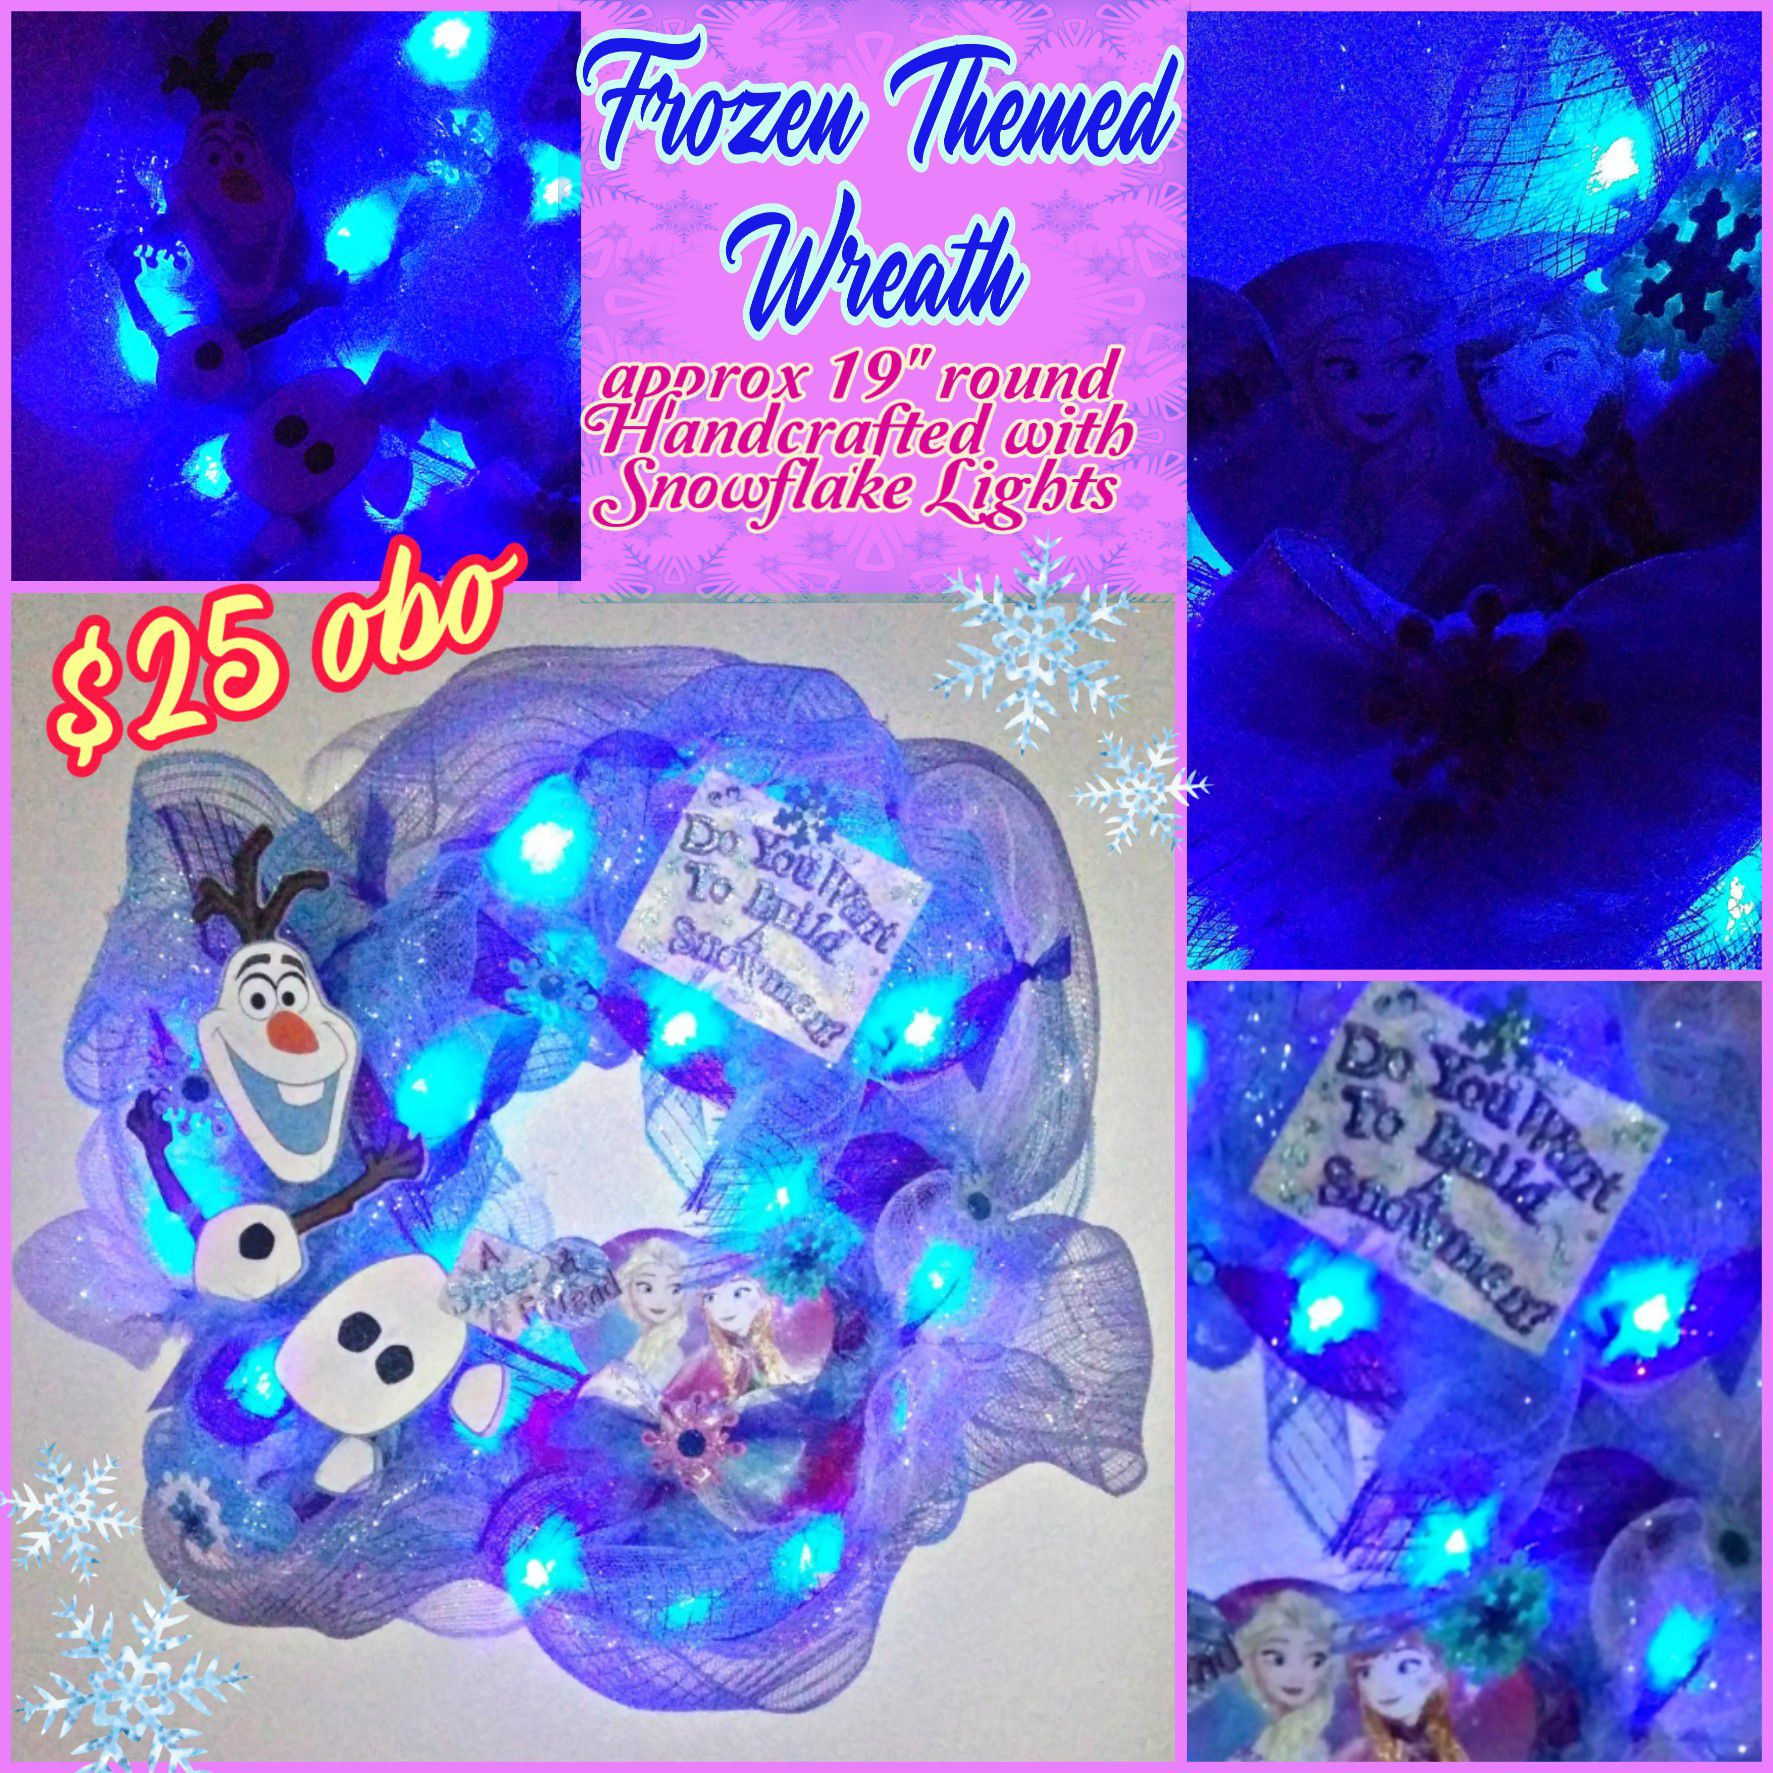 Frozen Themed Handcrafted Lighted Wreath